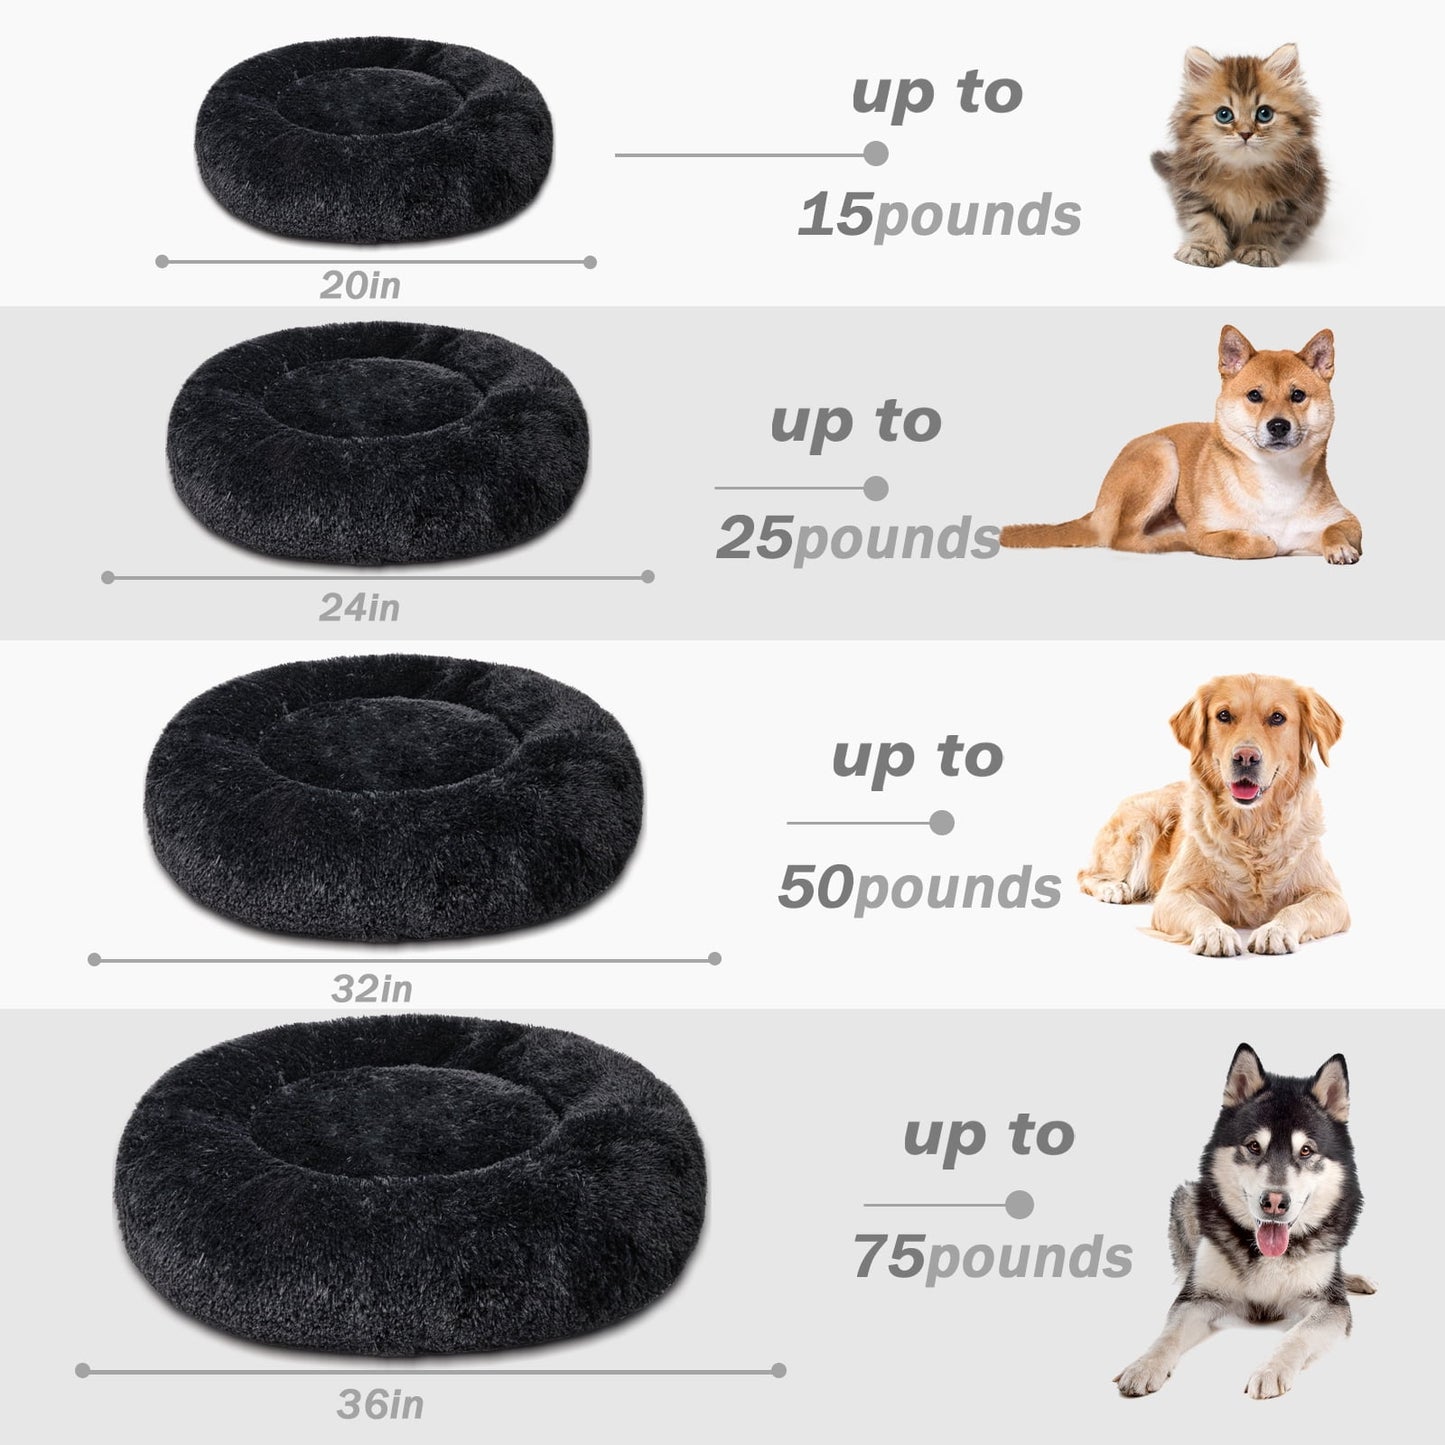 Calming Donut Dog Bed for Small Medium and Large dogs Anti-Anxiety Plush Soft and Cozy Cat Bed 36 inches Warming Pet Bed for Winter and Fall(Black)